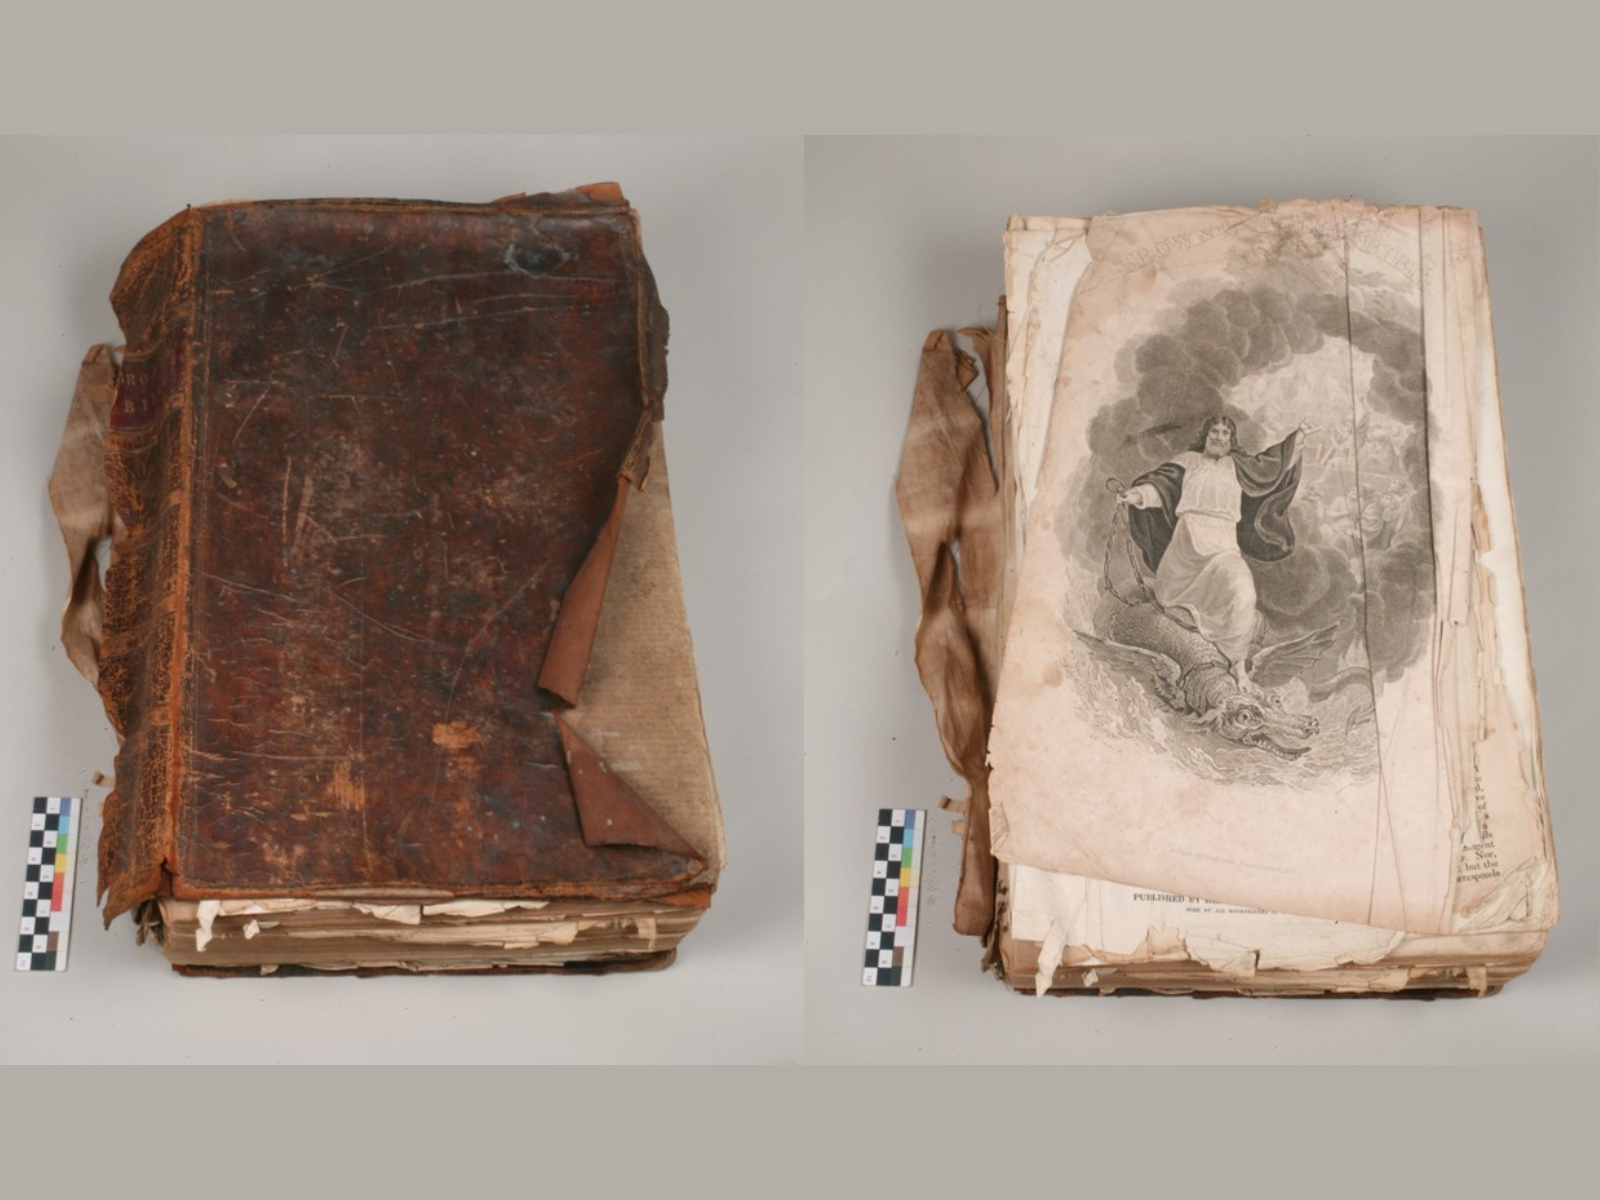 The Story of a Book: A Conservation Tale of Repair